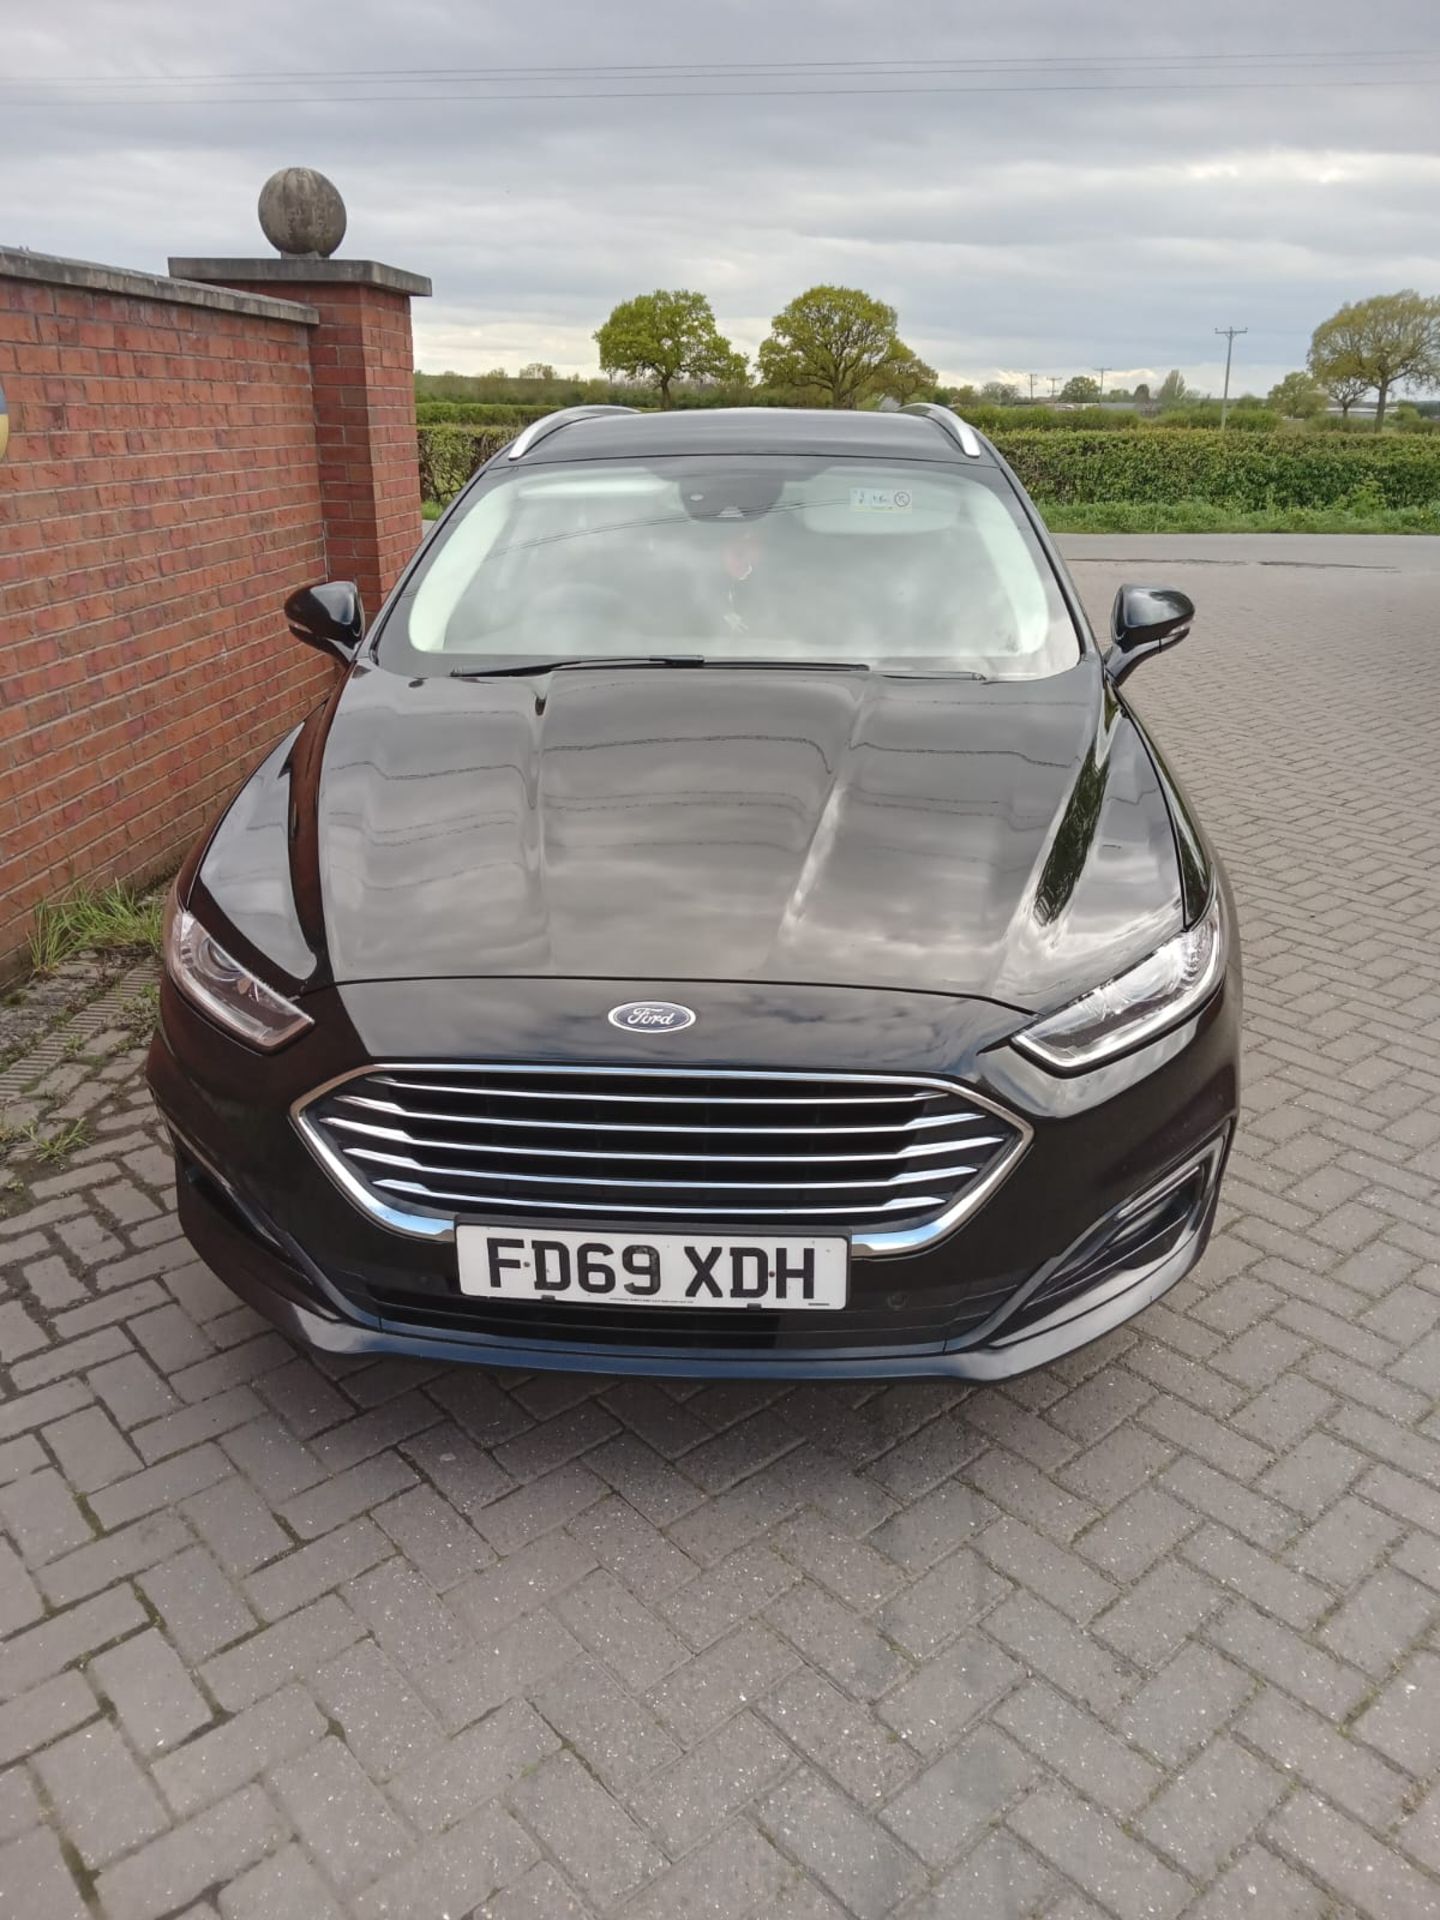 2019 FORD MONDEO - Image 2 of 11